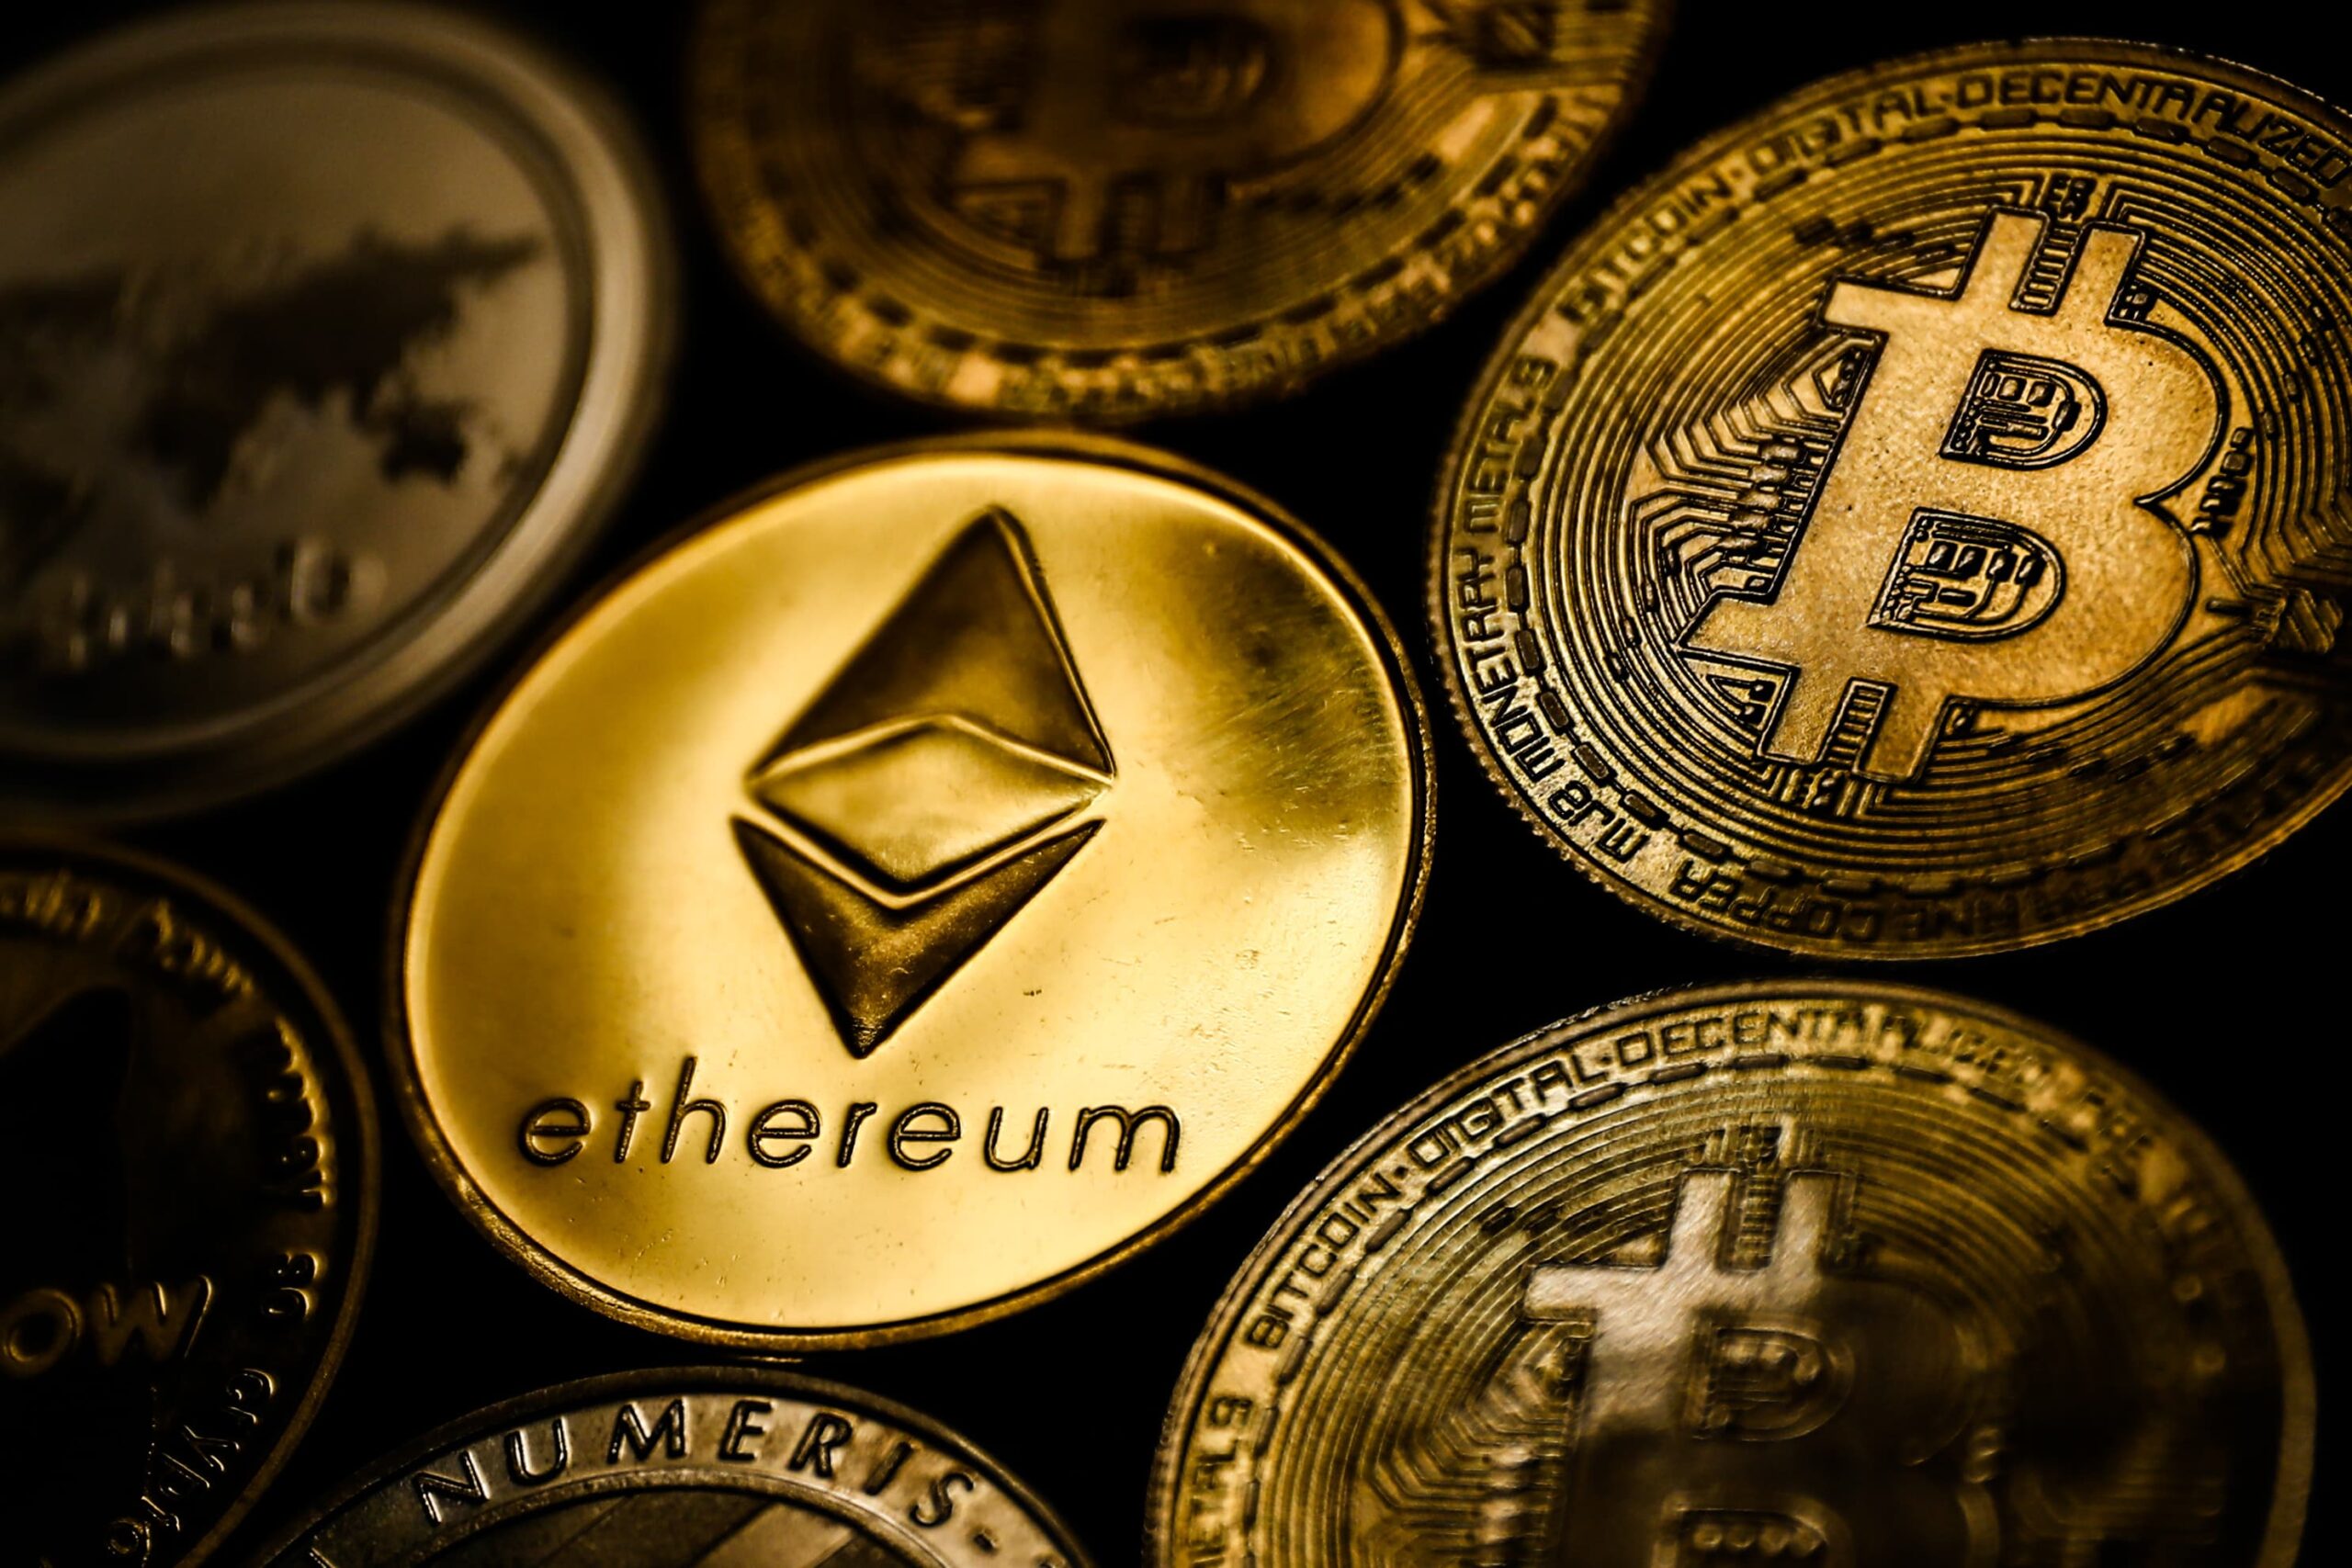 5 Top Cryptocurrencies To Buy For Best Short-Term Returns